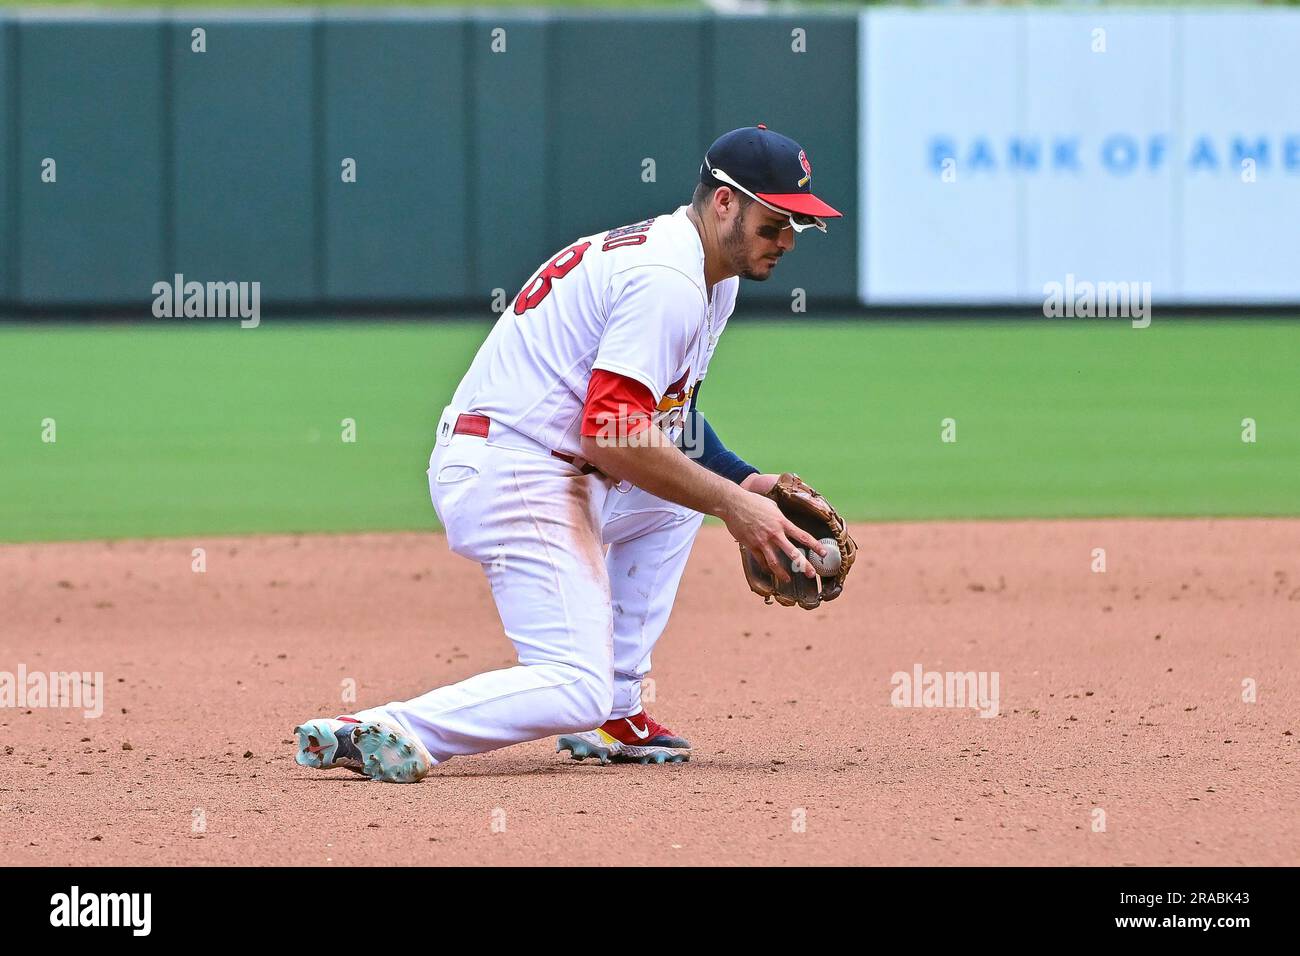 ST. LOUIS, MO - JUL 02: St. Louis Cardinals third baseman Nolan Arenado  (28) fields the ground ball during a game between the New York Yankees and  the St. Louis Cardinals on